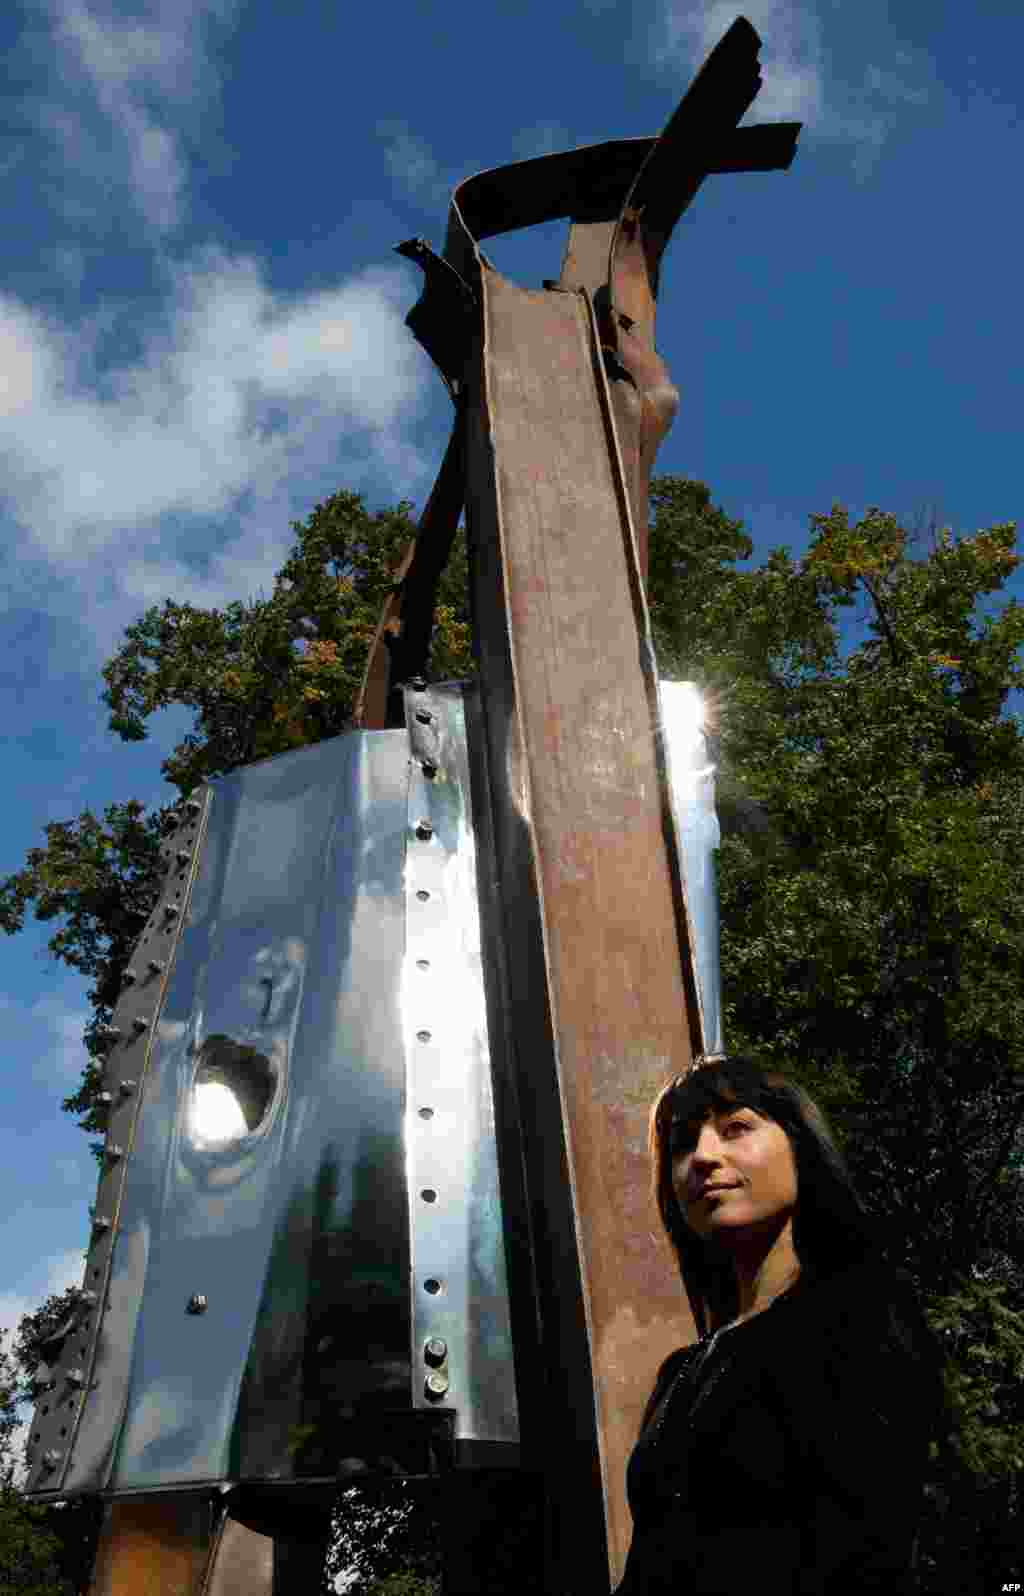 U.S. artist Miya Ando poses in London next to her work, After 9/11, made from steel recovered from the World Trade Center. The sculpture was moved from its temporary location in Battersea Park to London&#39;s Olympic Park after a long delay in designating a permanent home. It was a gift from the Port Authority of New York and New Jersey to the United Kingdom.&nbsp;